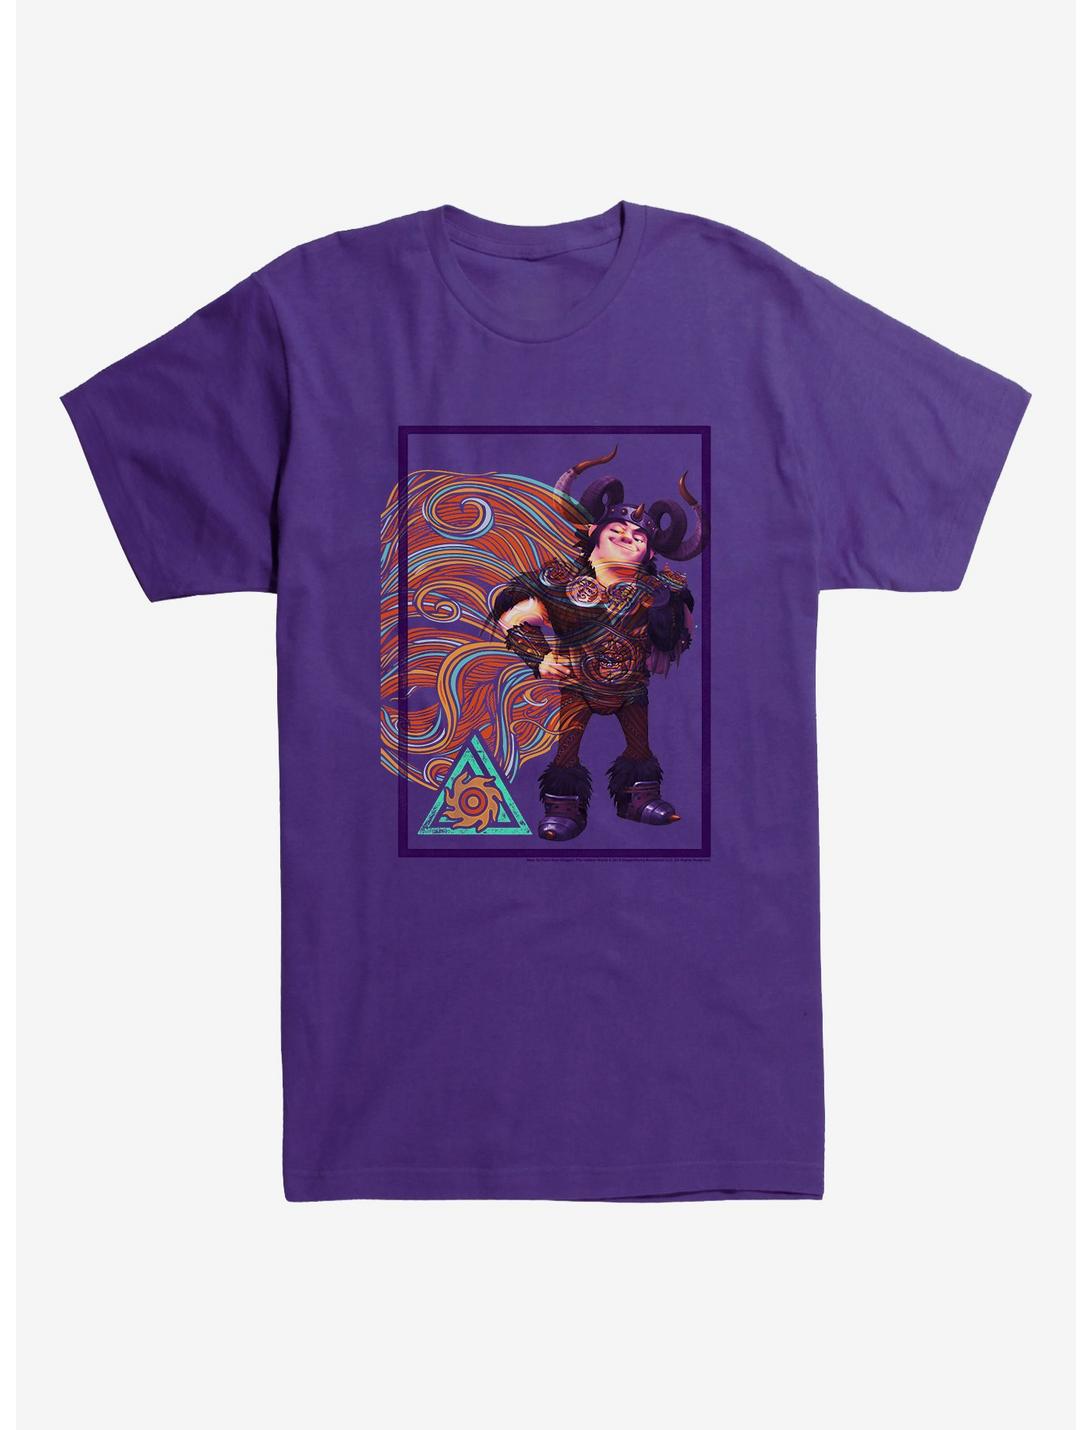 How To Train Your Dragon Snotlout Swirl T-Shirt, PURPLE, hi-res